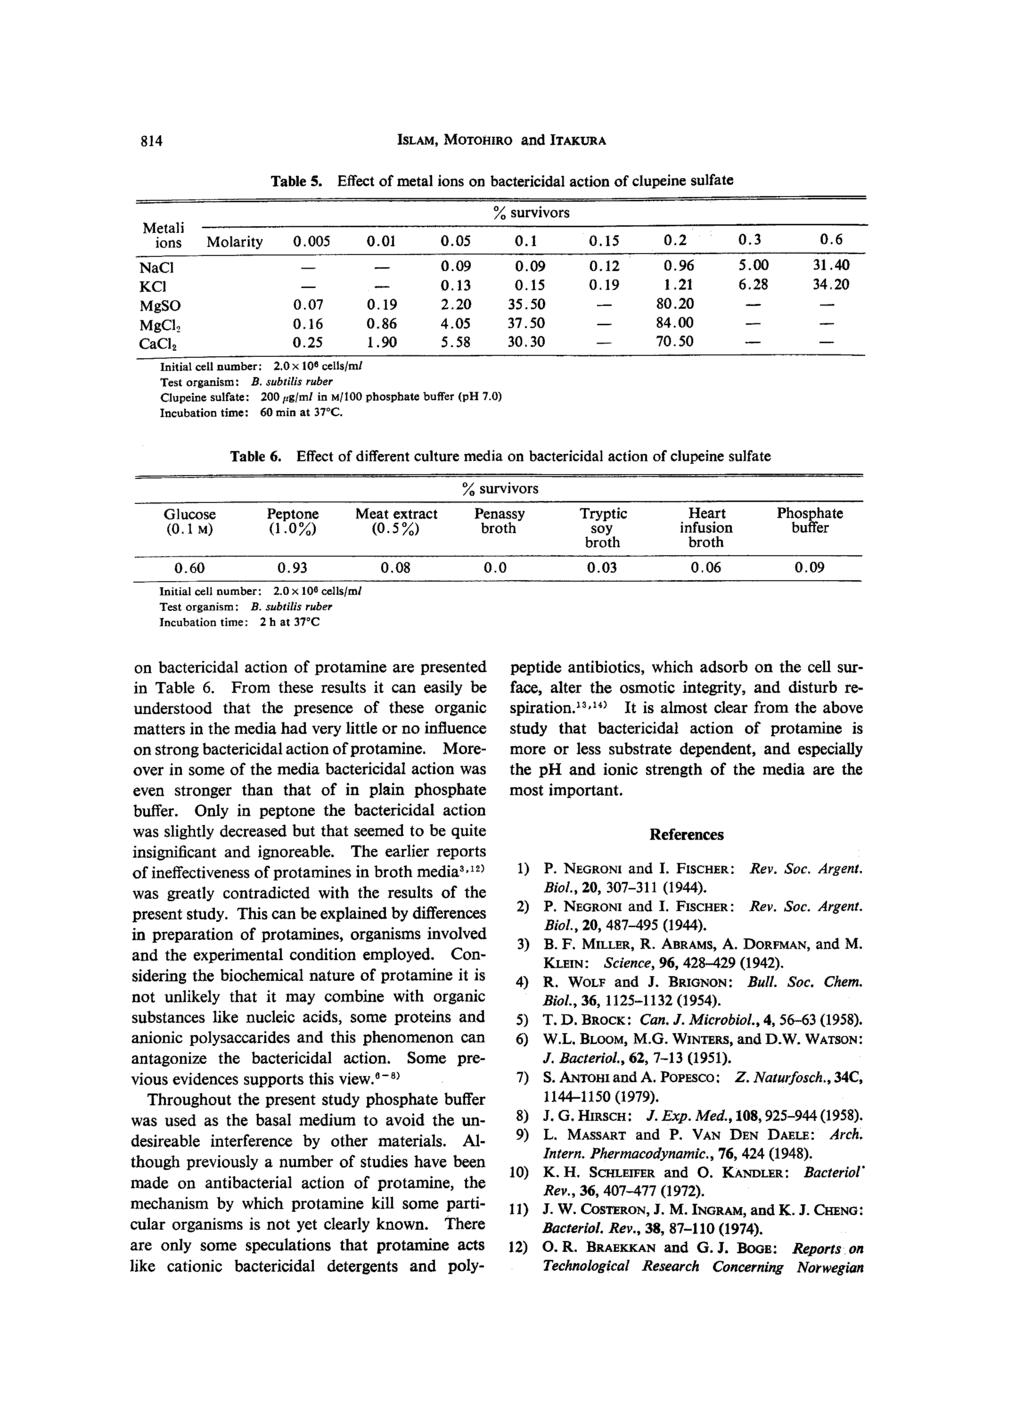 814 ISLAM, MOTOHIRo and ITAKURA Table 5. Effect of metal ions on bactericidal action of clupeine sulfate % survivors Metali ions Molarity 0.005 0.01 0.05 0.1 0.15 0.2 0.3 0.6 NaCl - - 0.09 0.09 0.12 0.